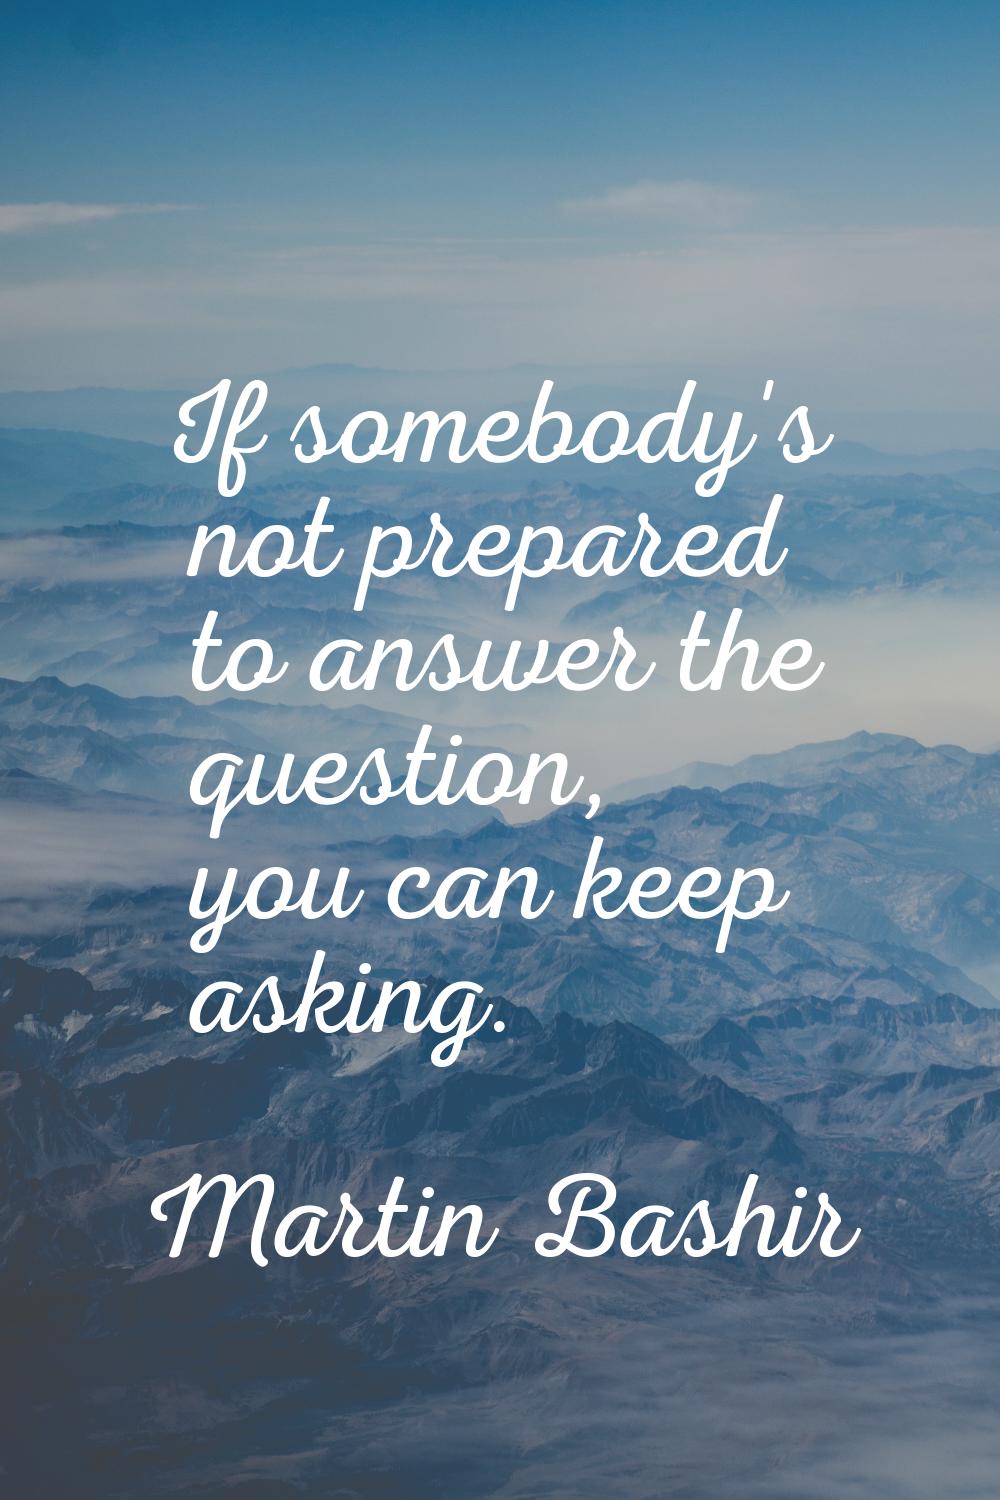 If somebody's not prepared to answer the question, you can keep asking.